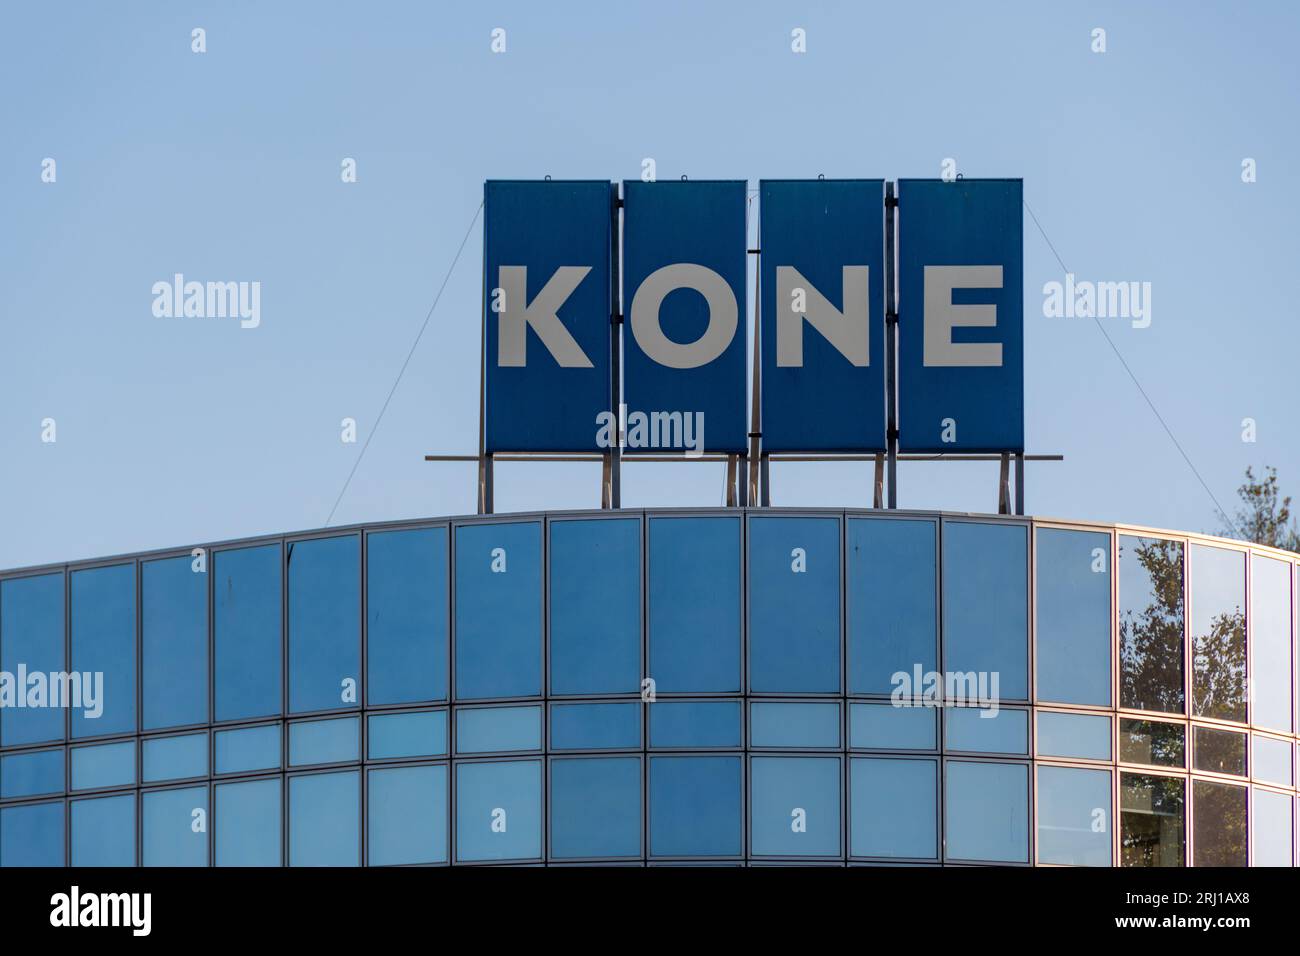 Sign and logo on the Kone building in Asnieres-sur-Seine, France. Kone is a Finnish company specializing in elevators, escalators and automatic doors Stock Photo